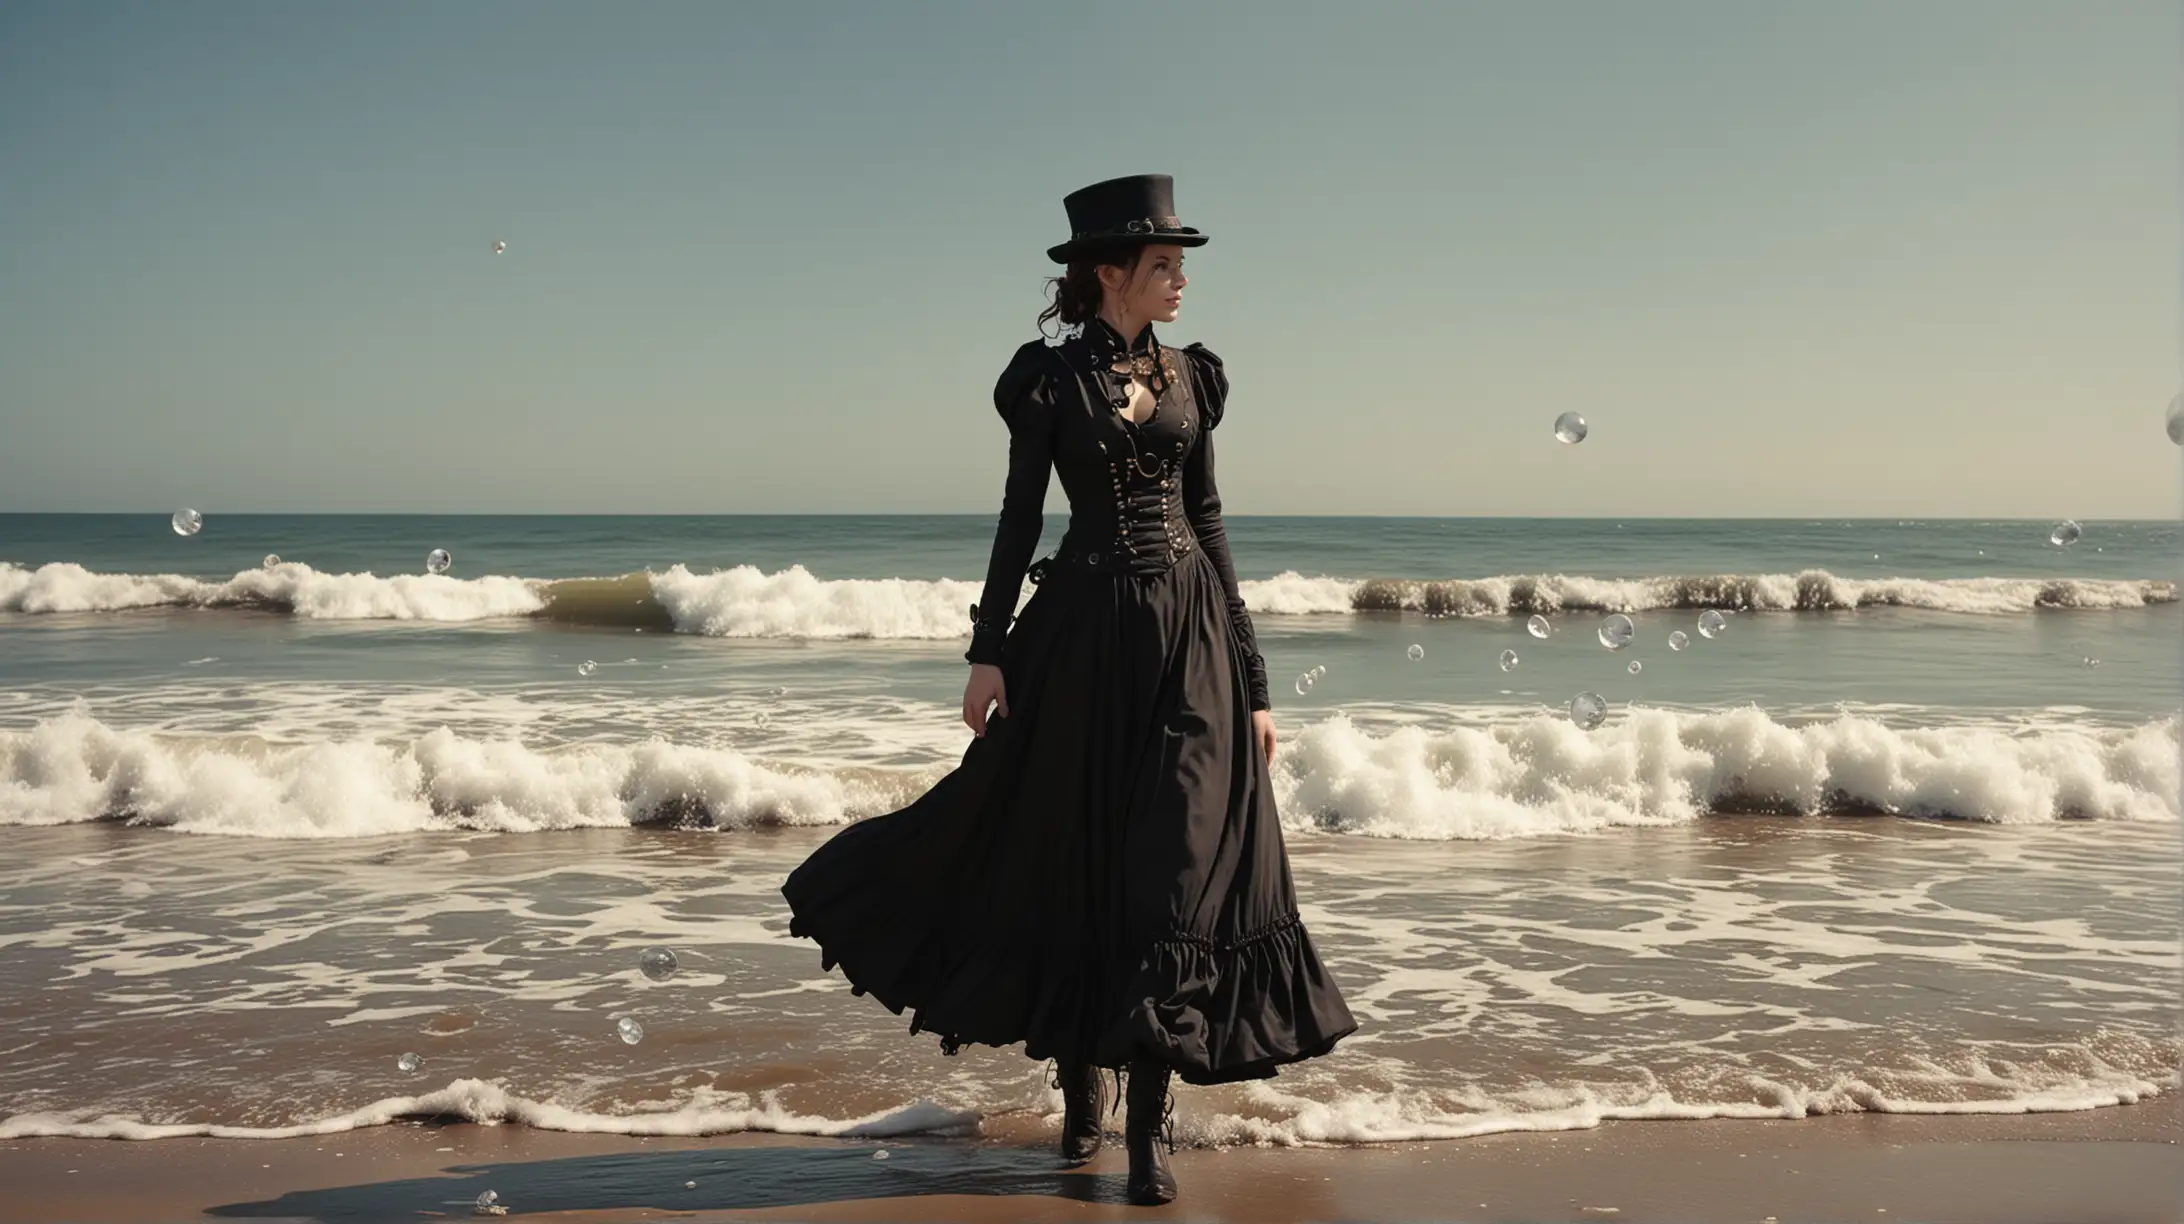 A very sad steampunk woman in a black dress walks along the seashore, all foot passengers in steampunk suits give a wide berth to her, sunny, the waves are high, some water bubbles in the air